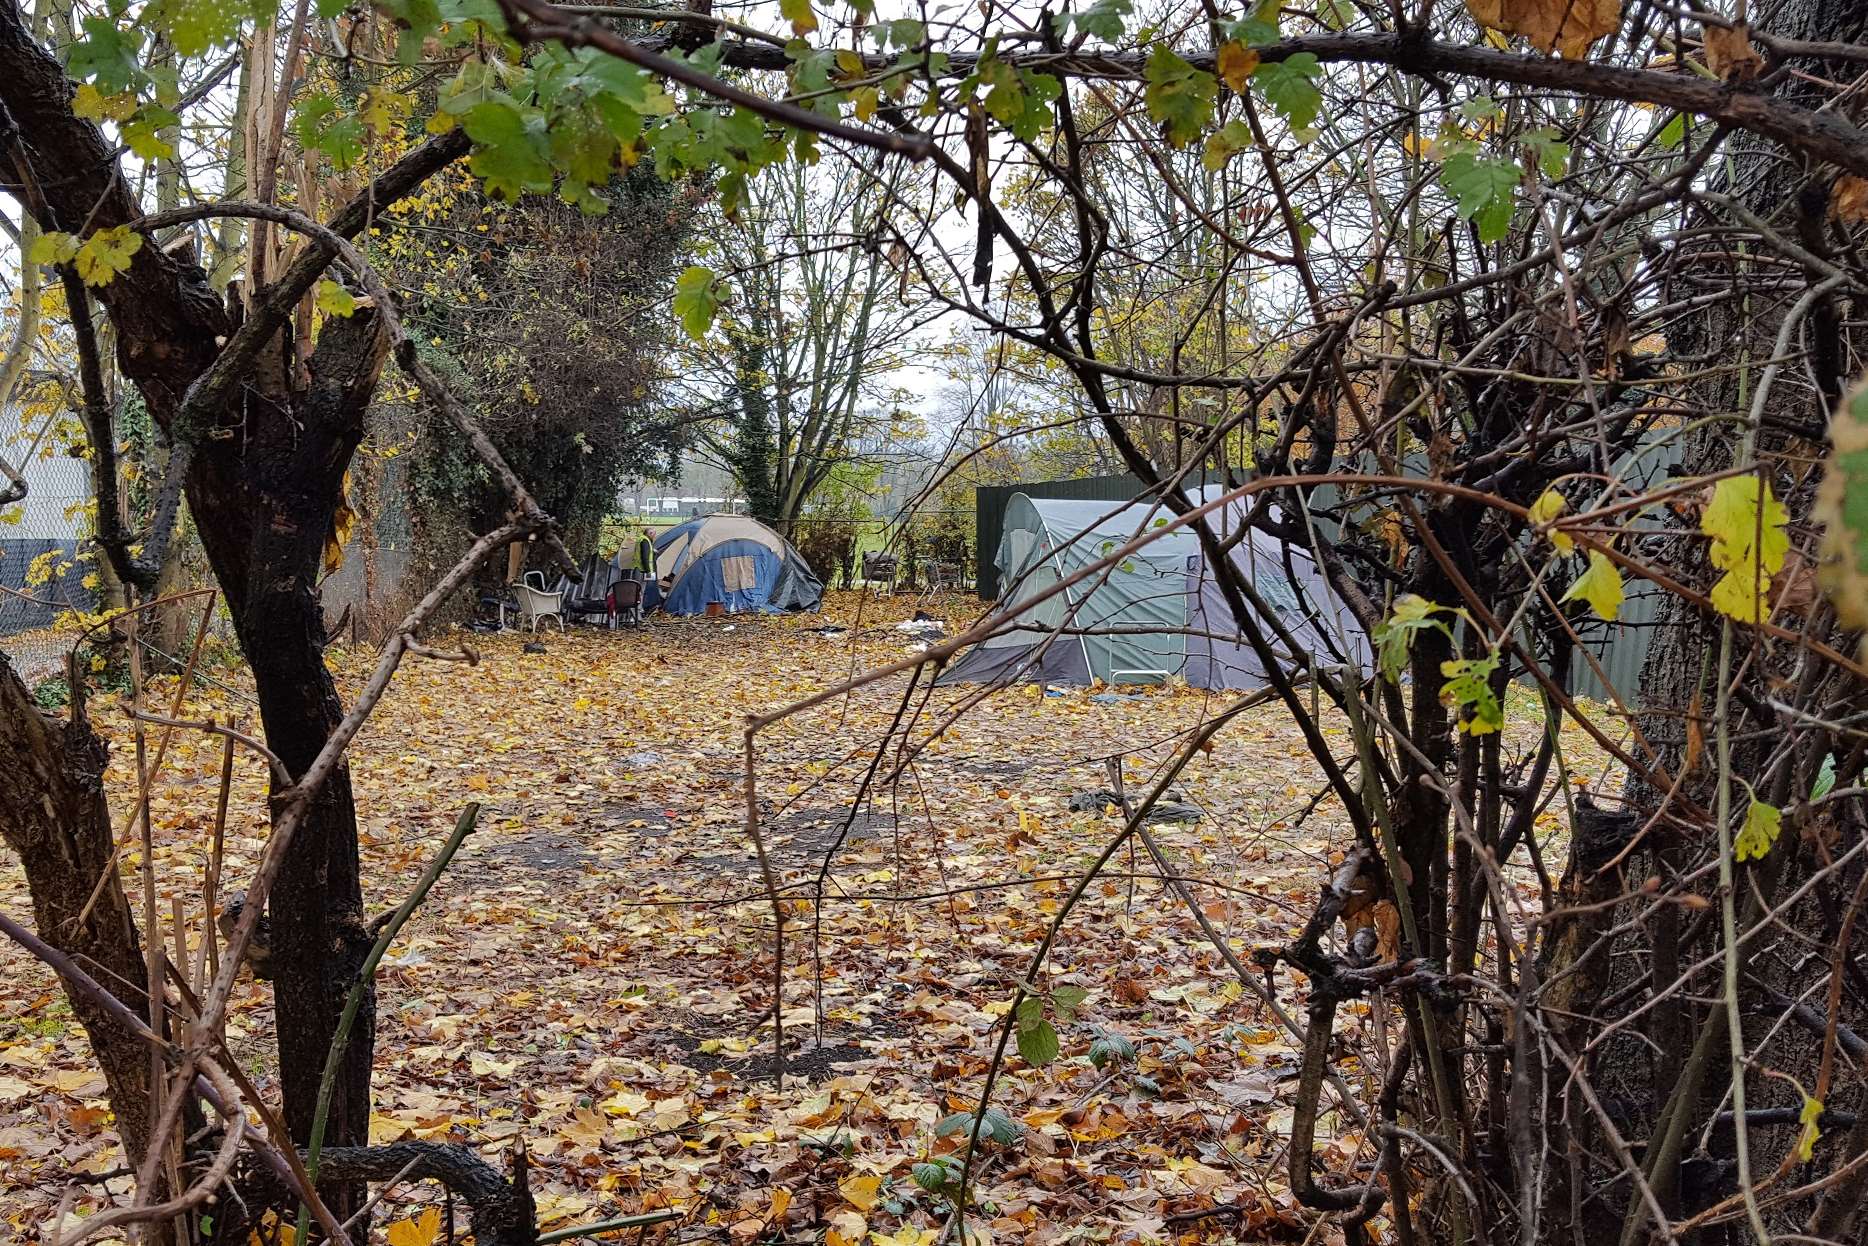 There were just two tents left at the site